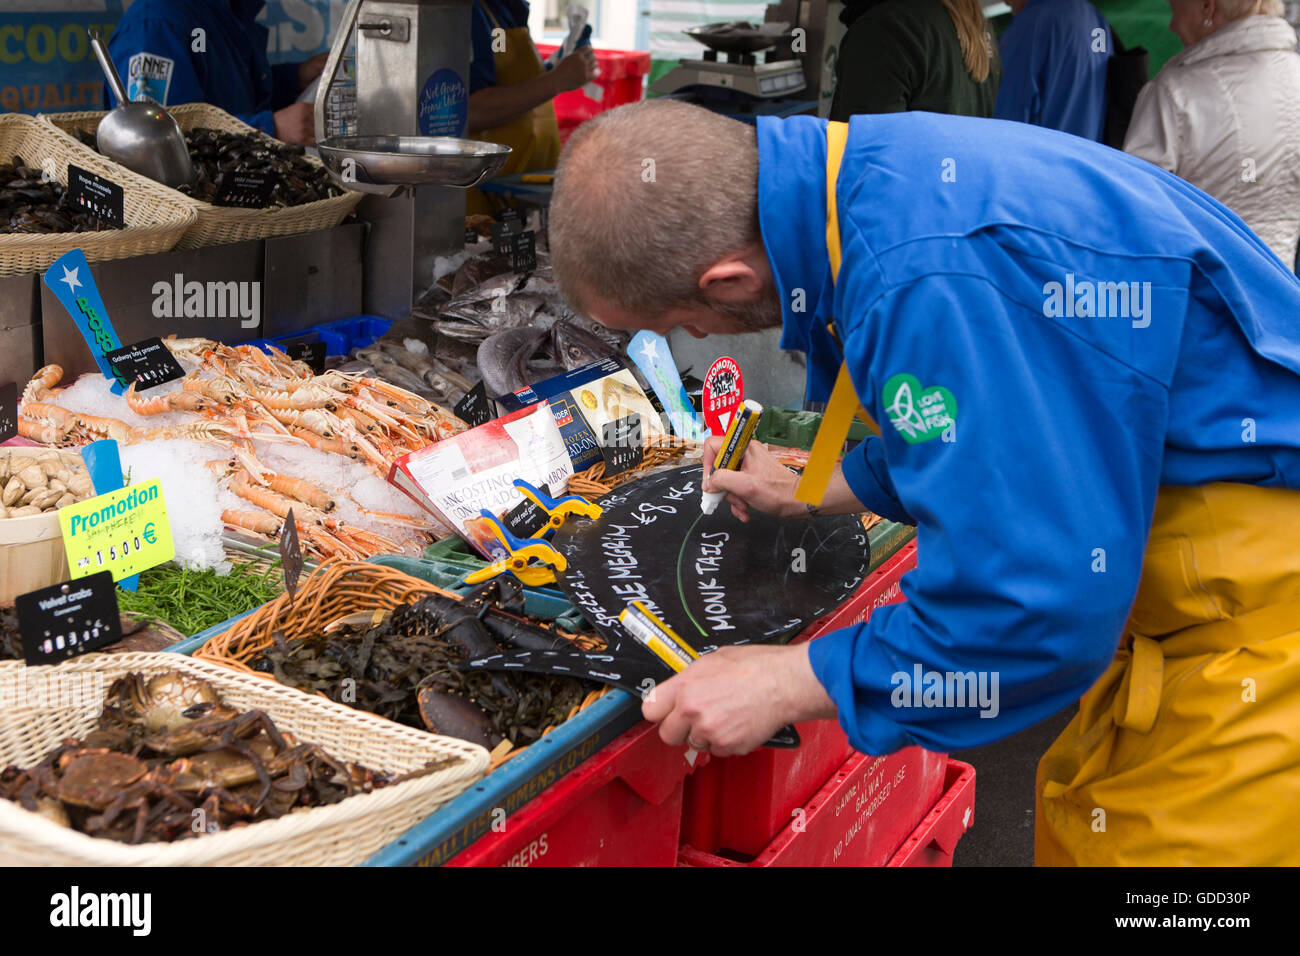 Ireland, Co Galway, Galway, Saturday market, fishmonger writing monkfish tail prices on board Stock Photo